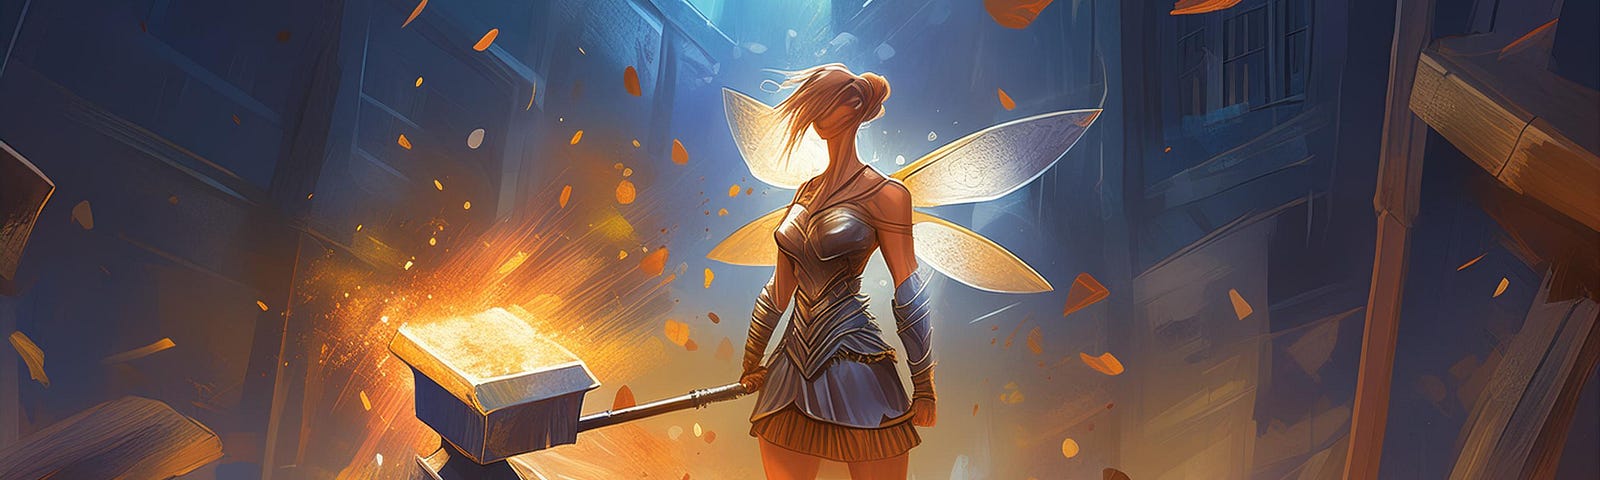 A fairy standing with a determined stance. She has an oversized hammer in her hand.